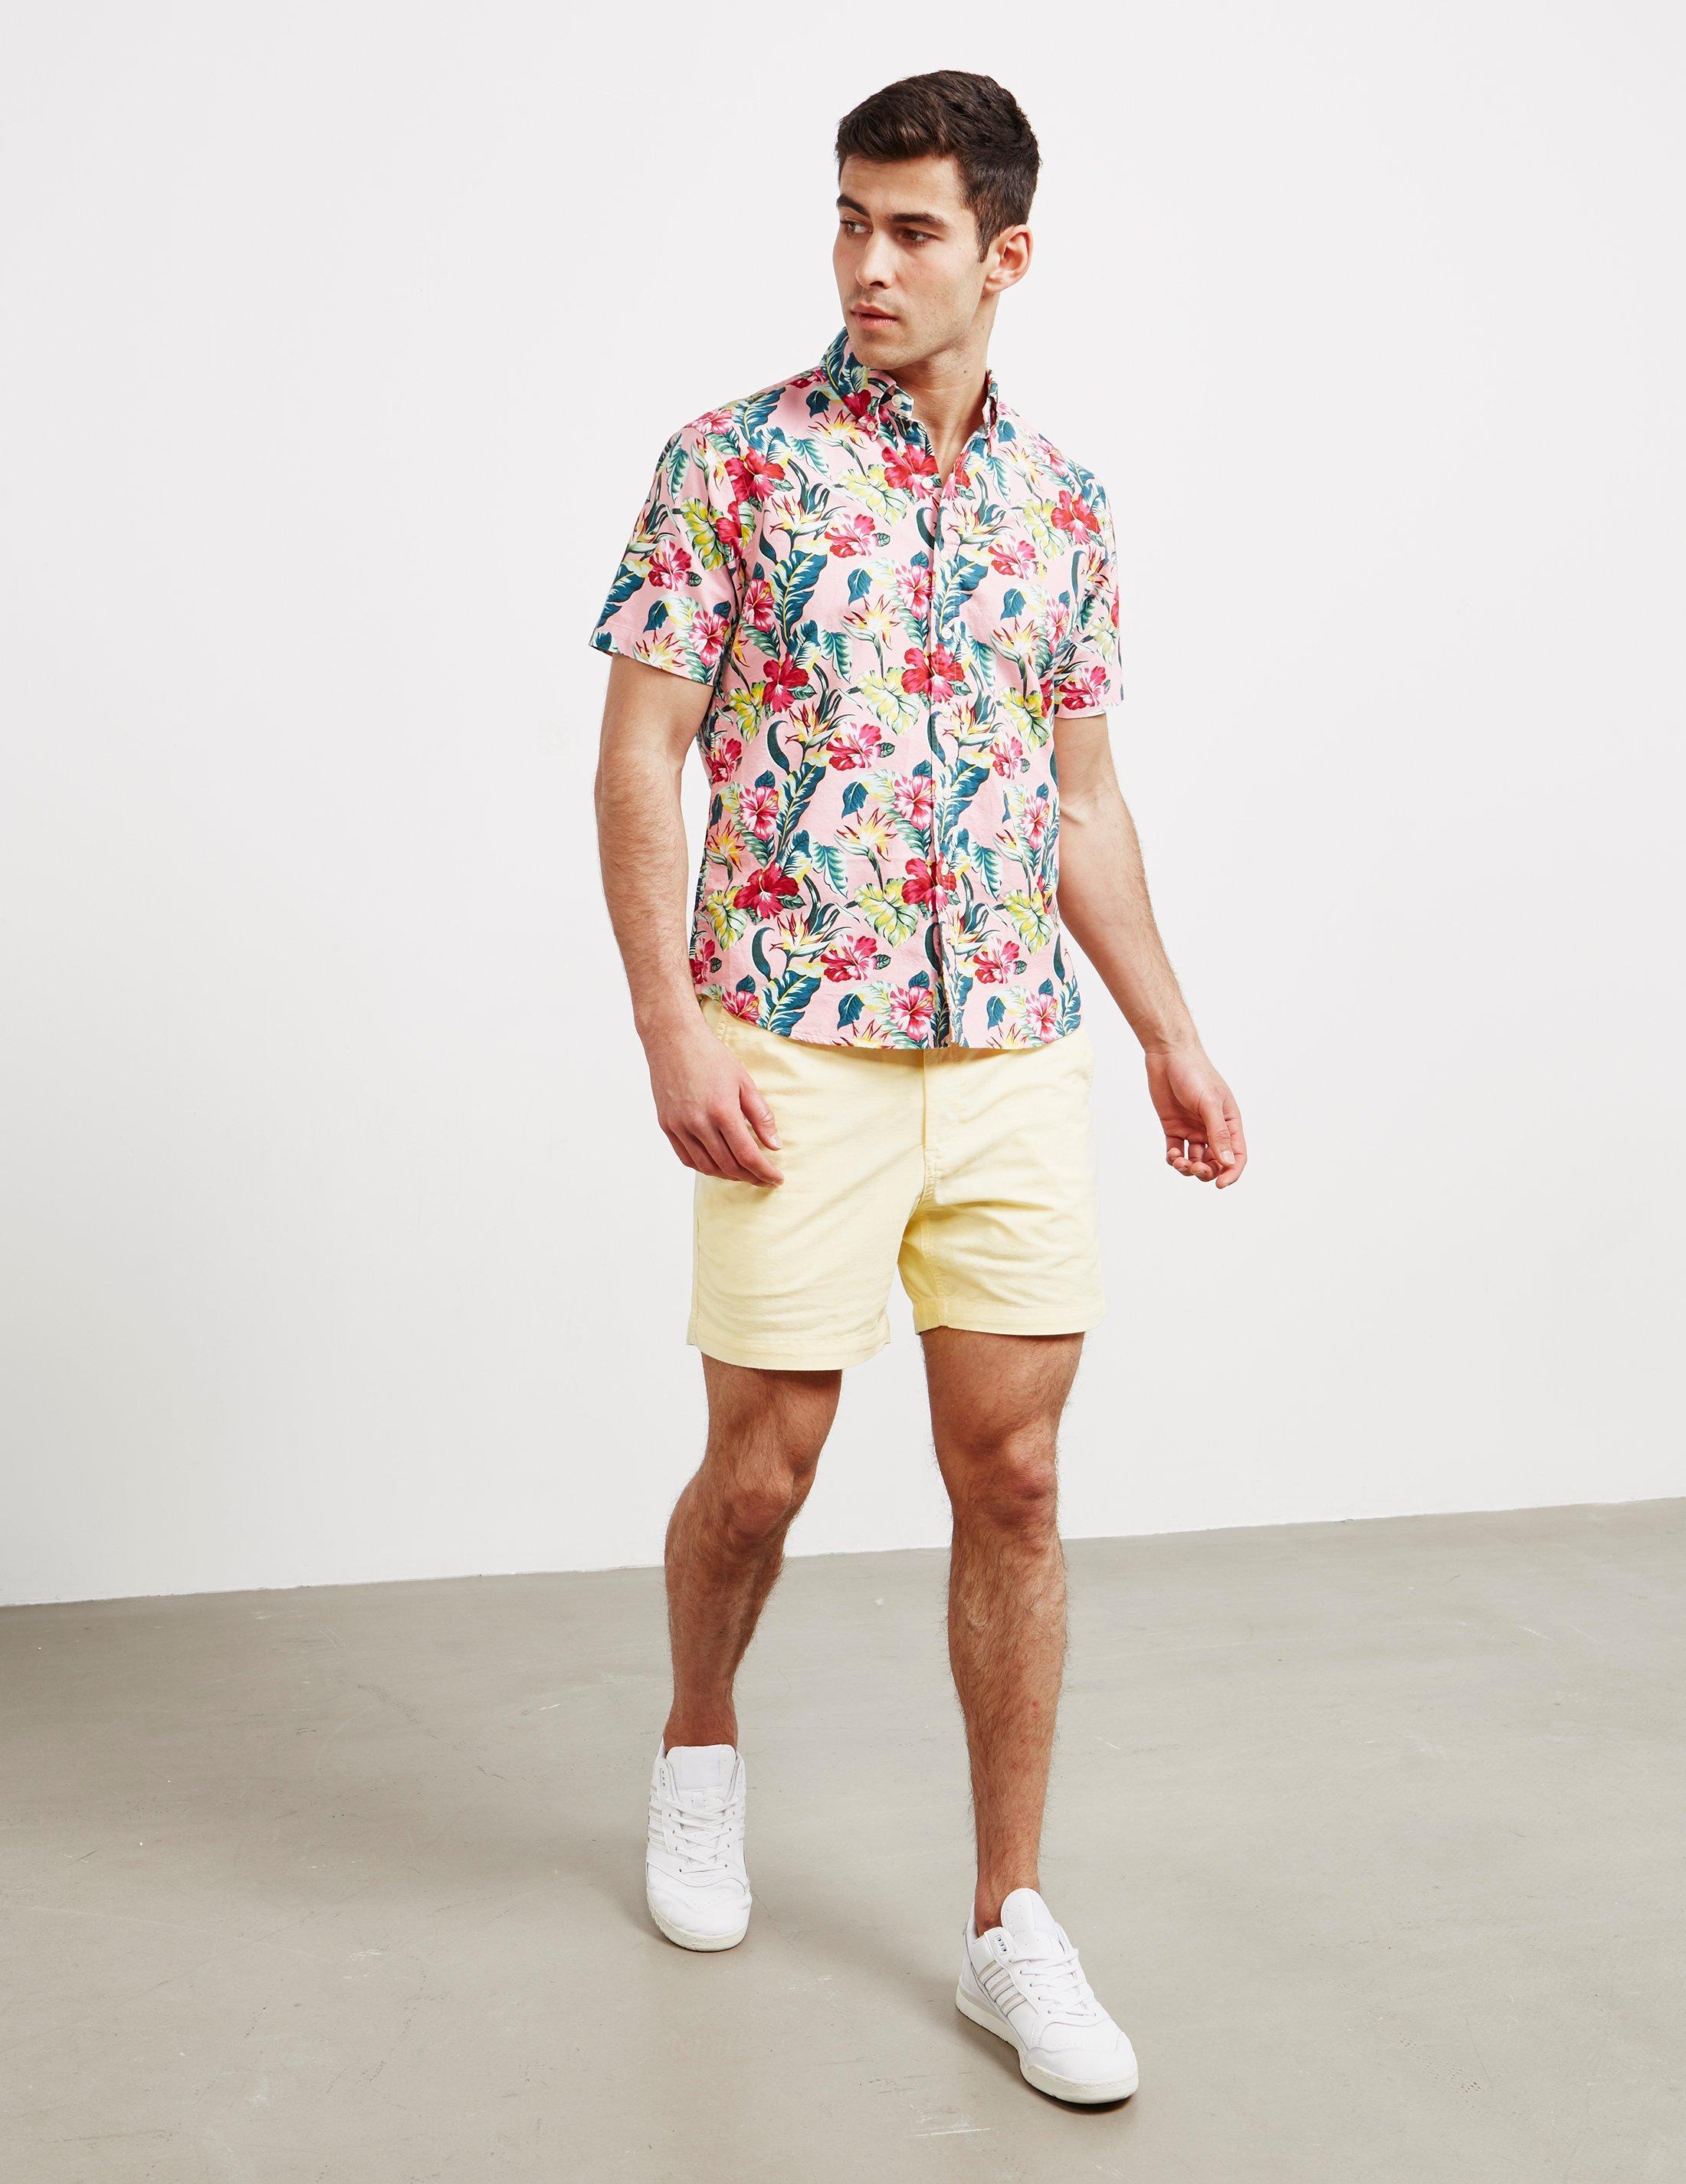 floral polo and shorts \u003e Up to 73% OFF 